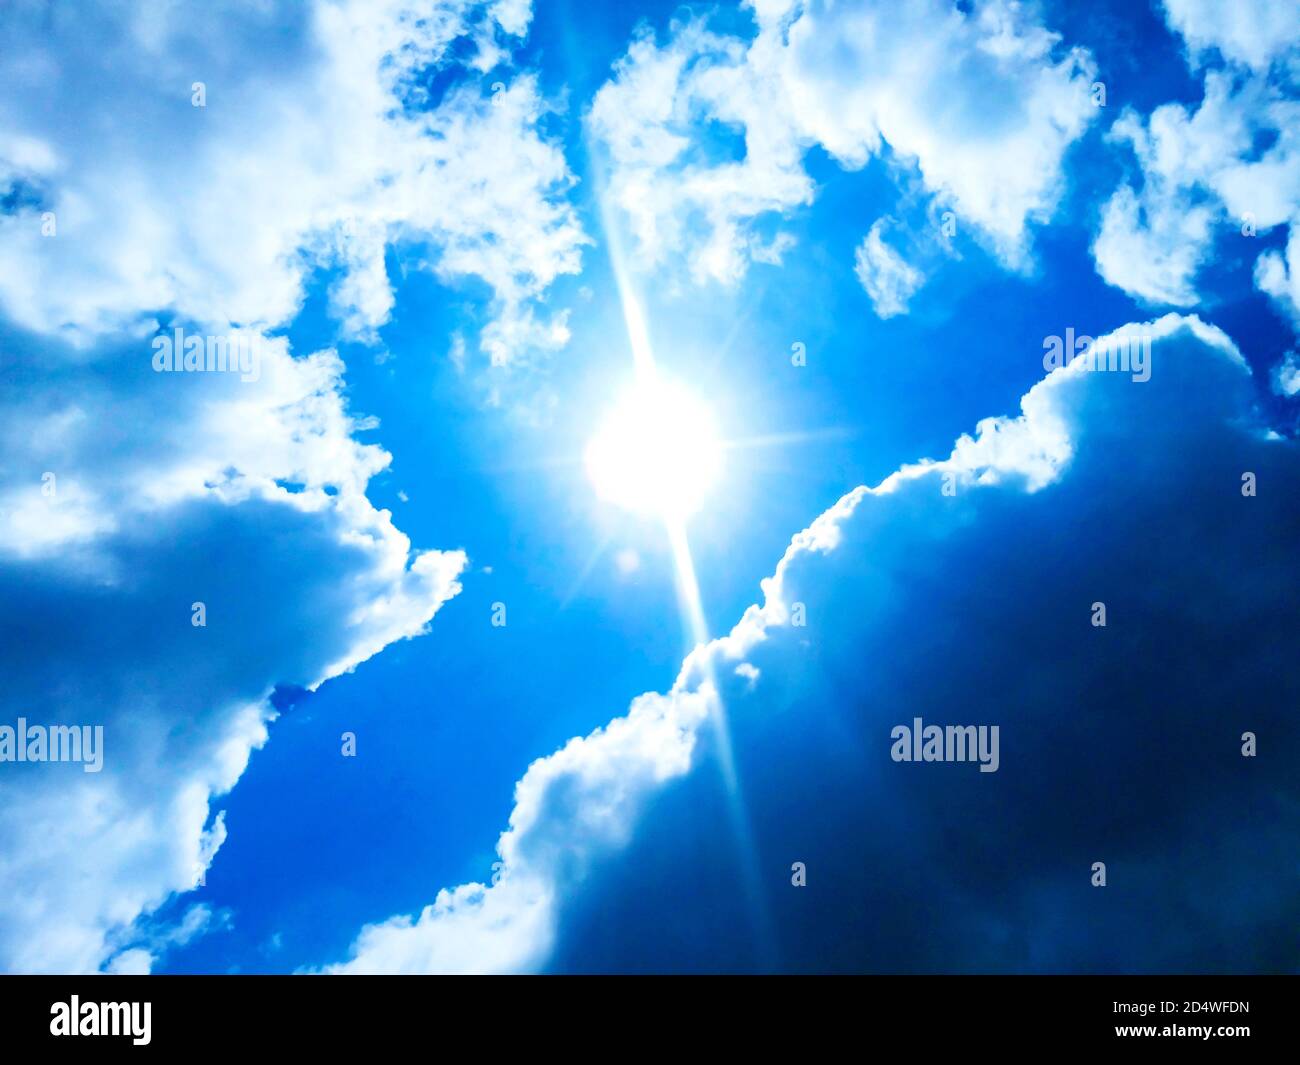 Sunny background, blue sky with white clouds and sun Stock Photo